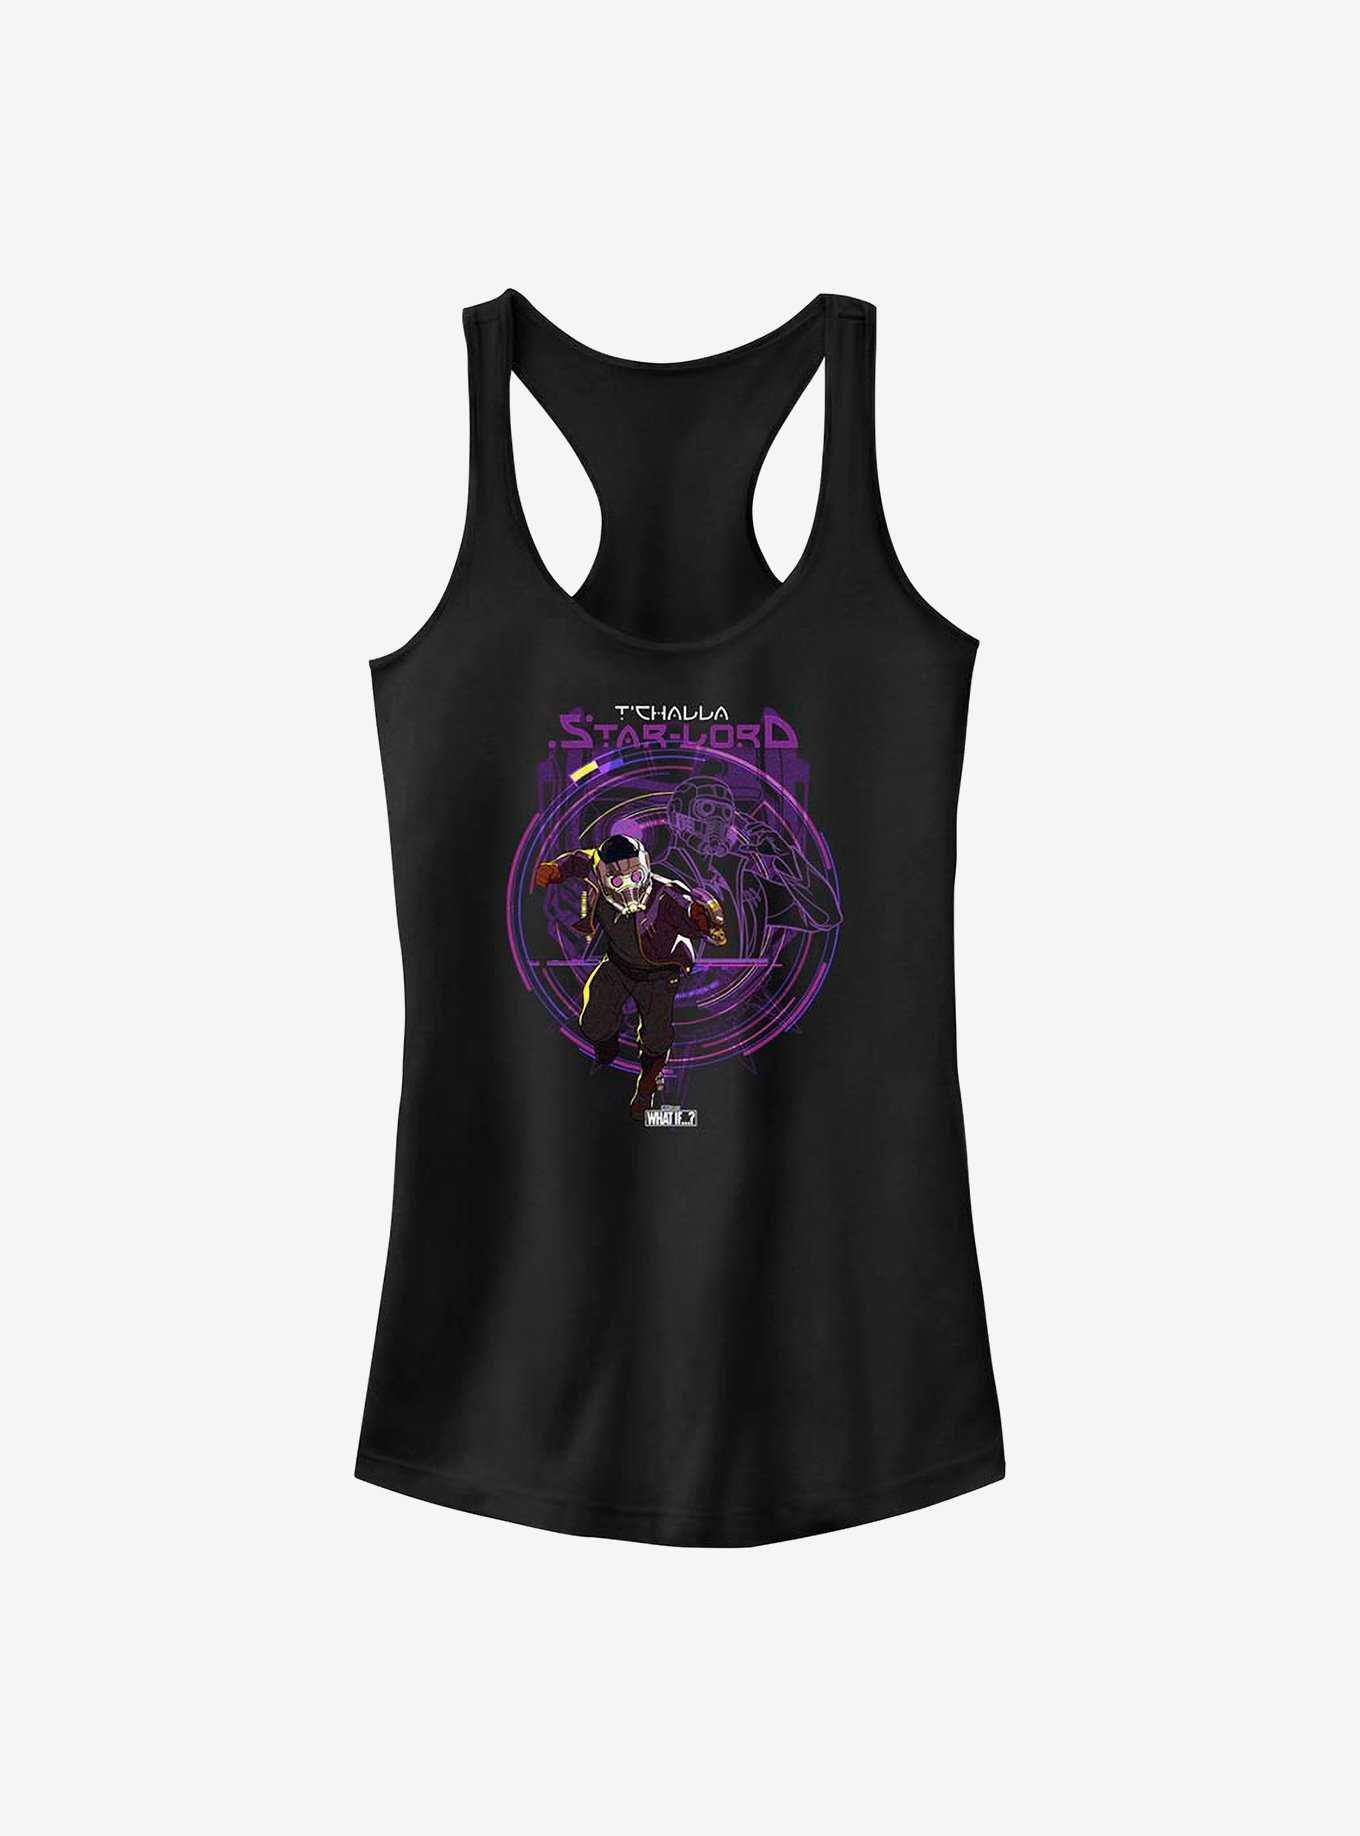 Marvel What If...? T'Challa Star-Lord Girls Tank, , hi-res